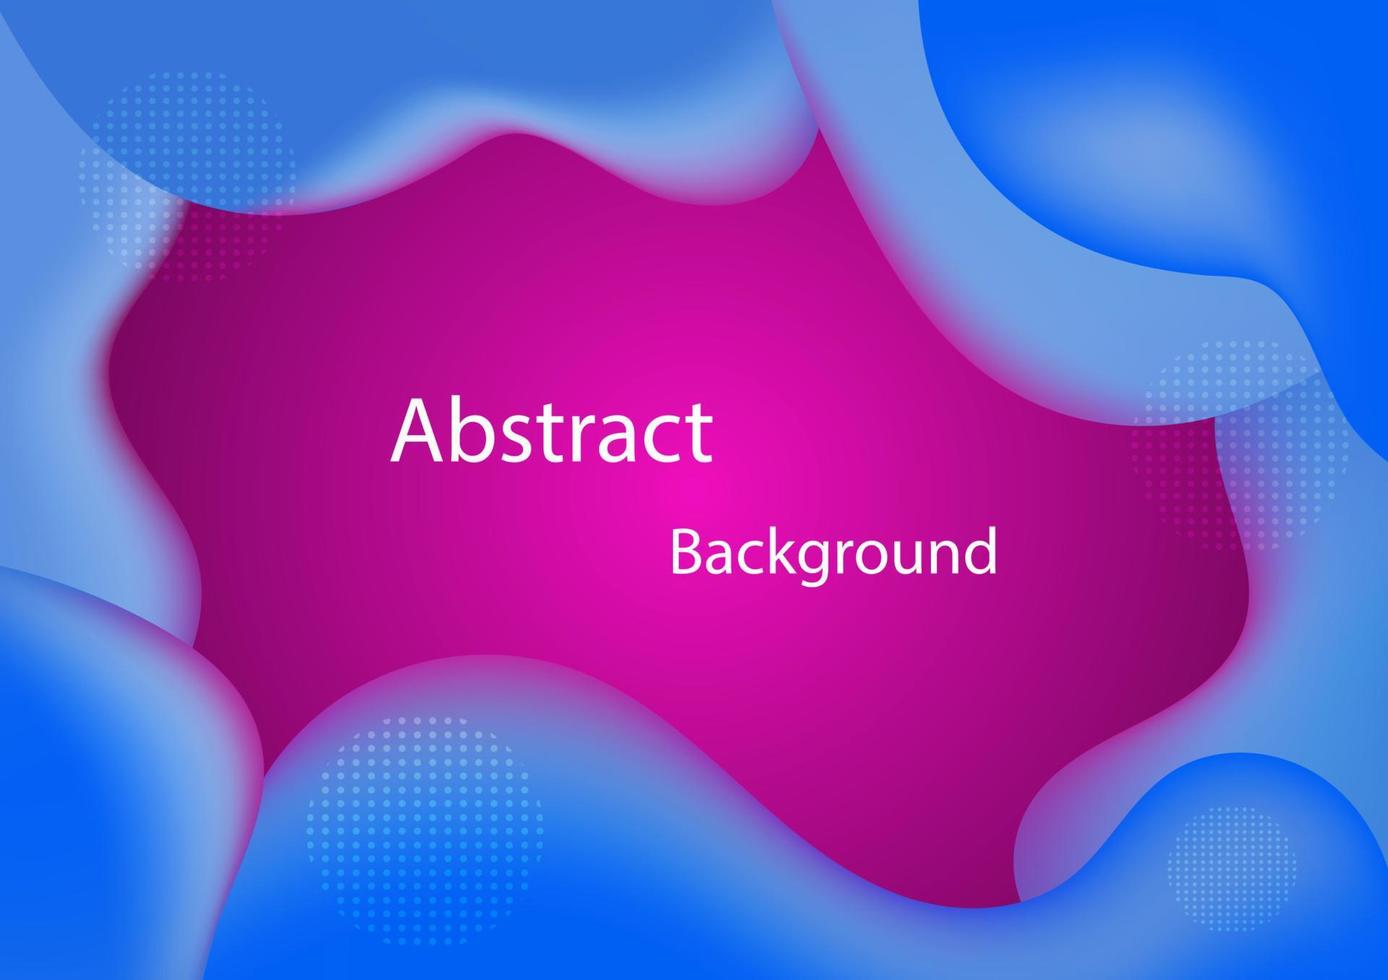 Abstract liquid background with geometric shapes in blue and purple tones.Fluid Vector Illustration EPS10. Business Presentation.